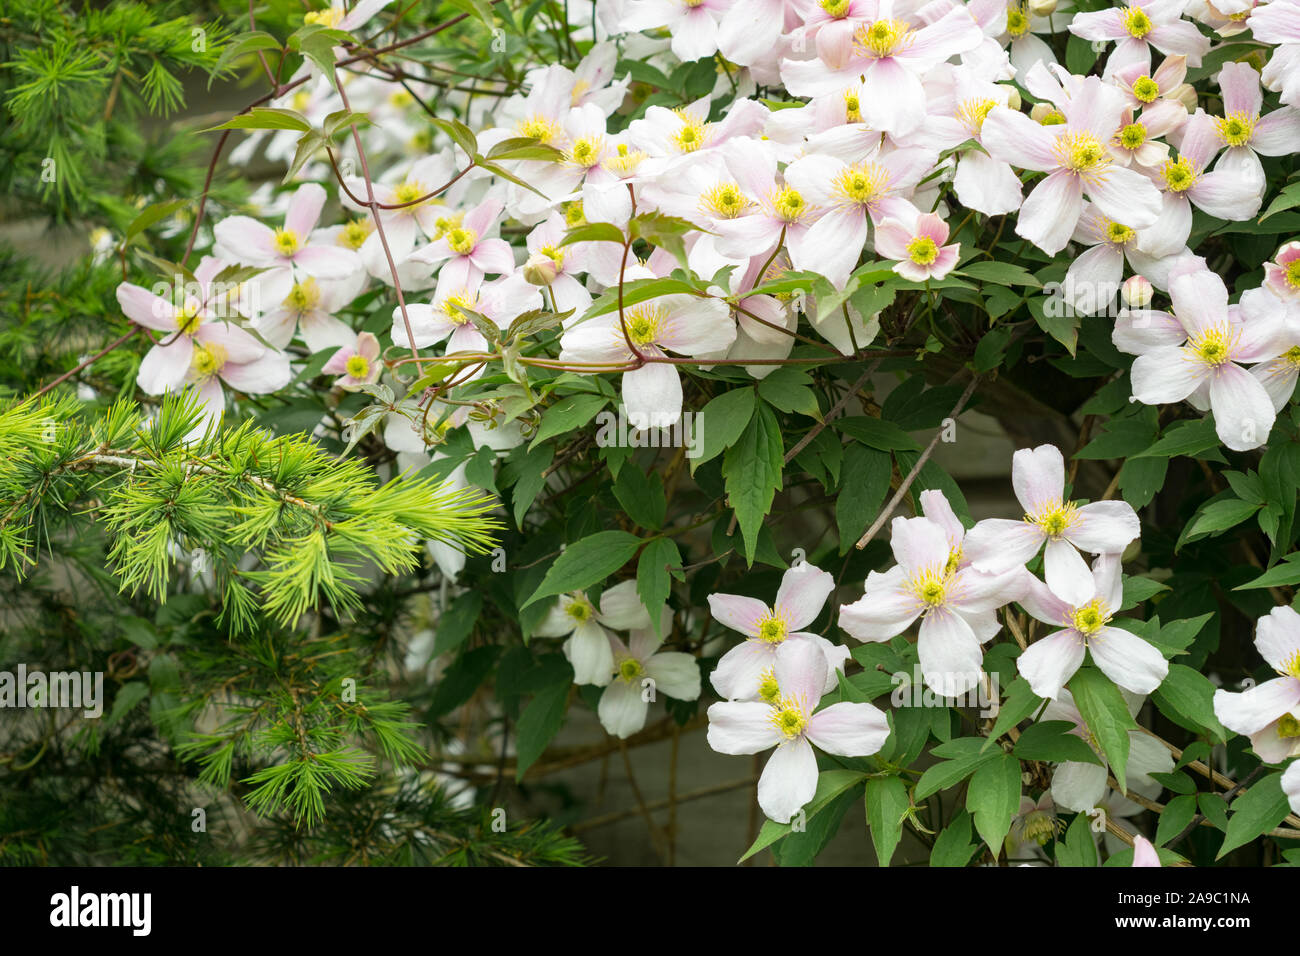 Clematis montana (also known as mountain clematis or Himalayan clematis) growing on a wall in a garden Stock Photo